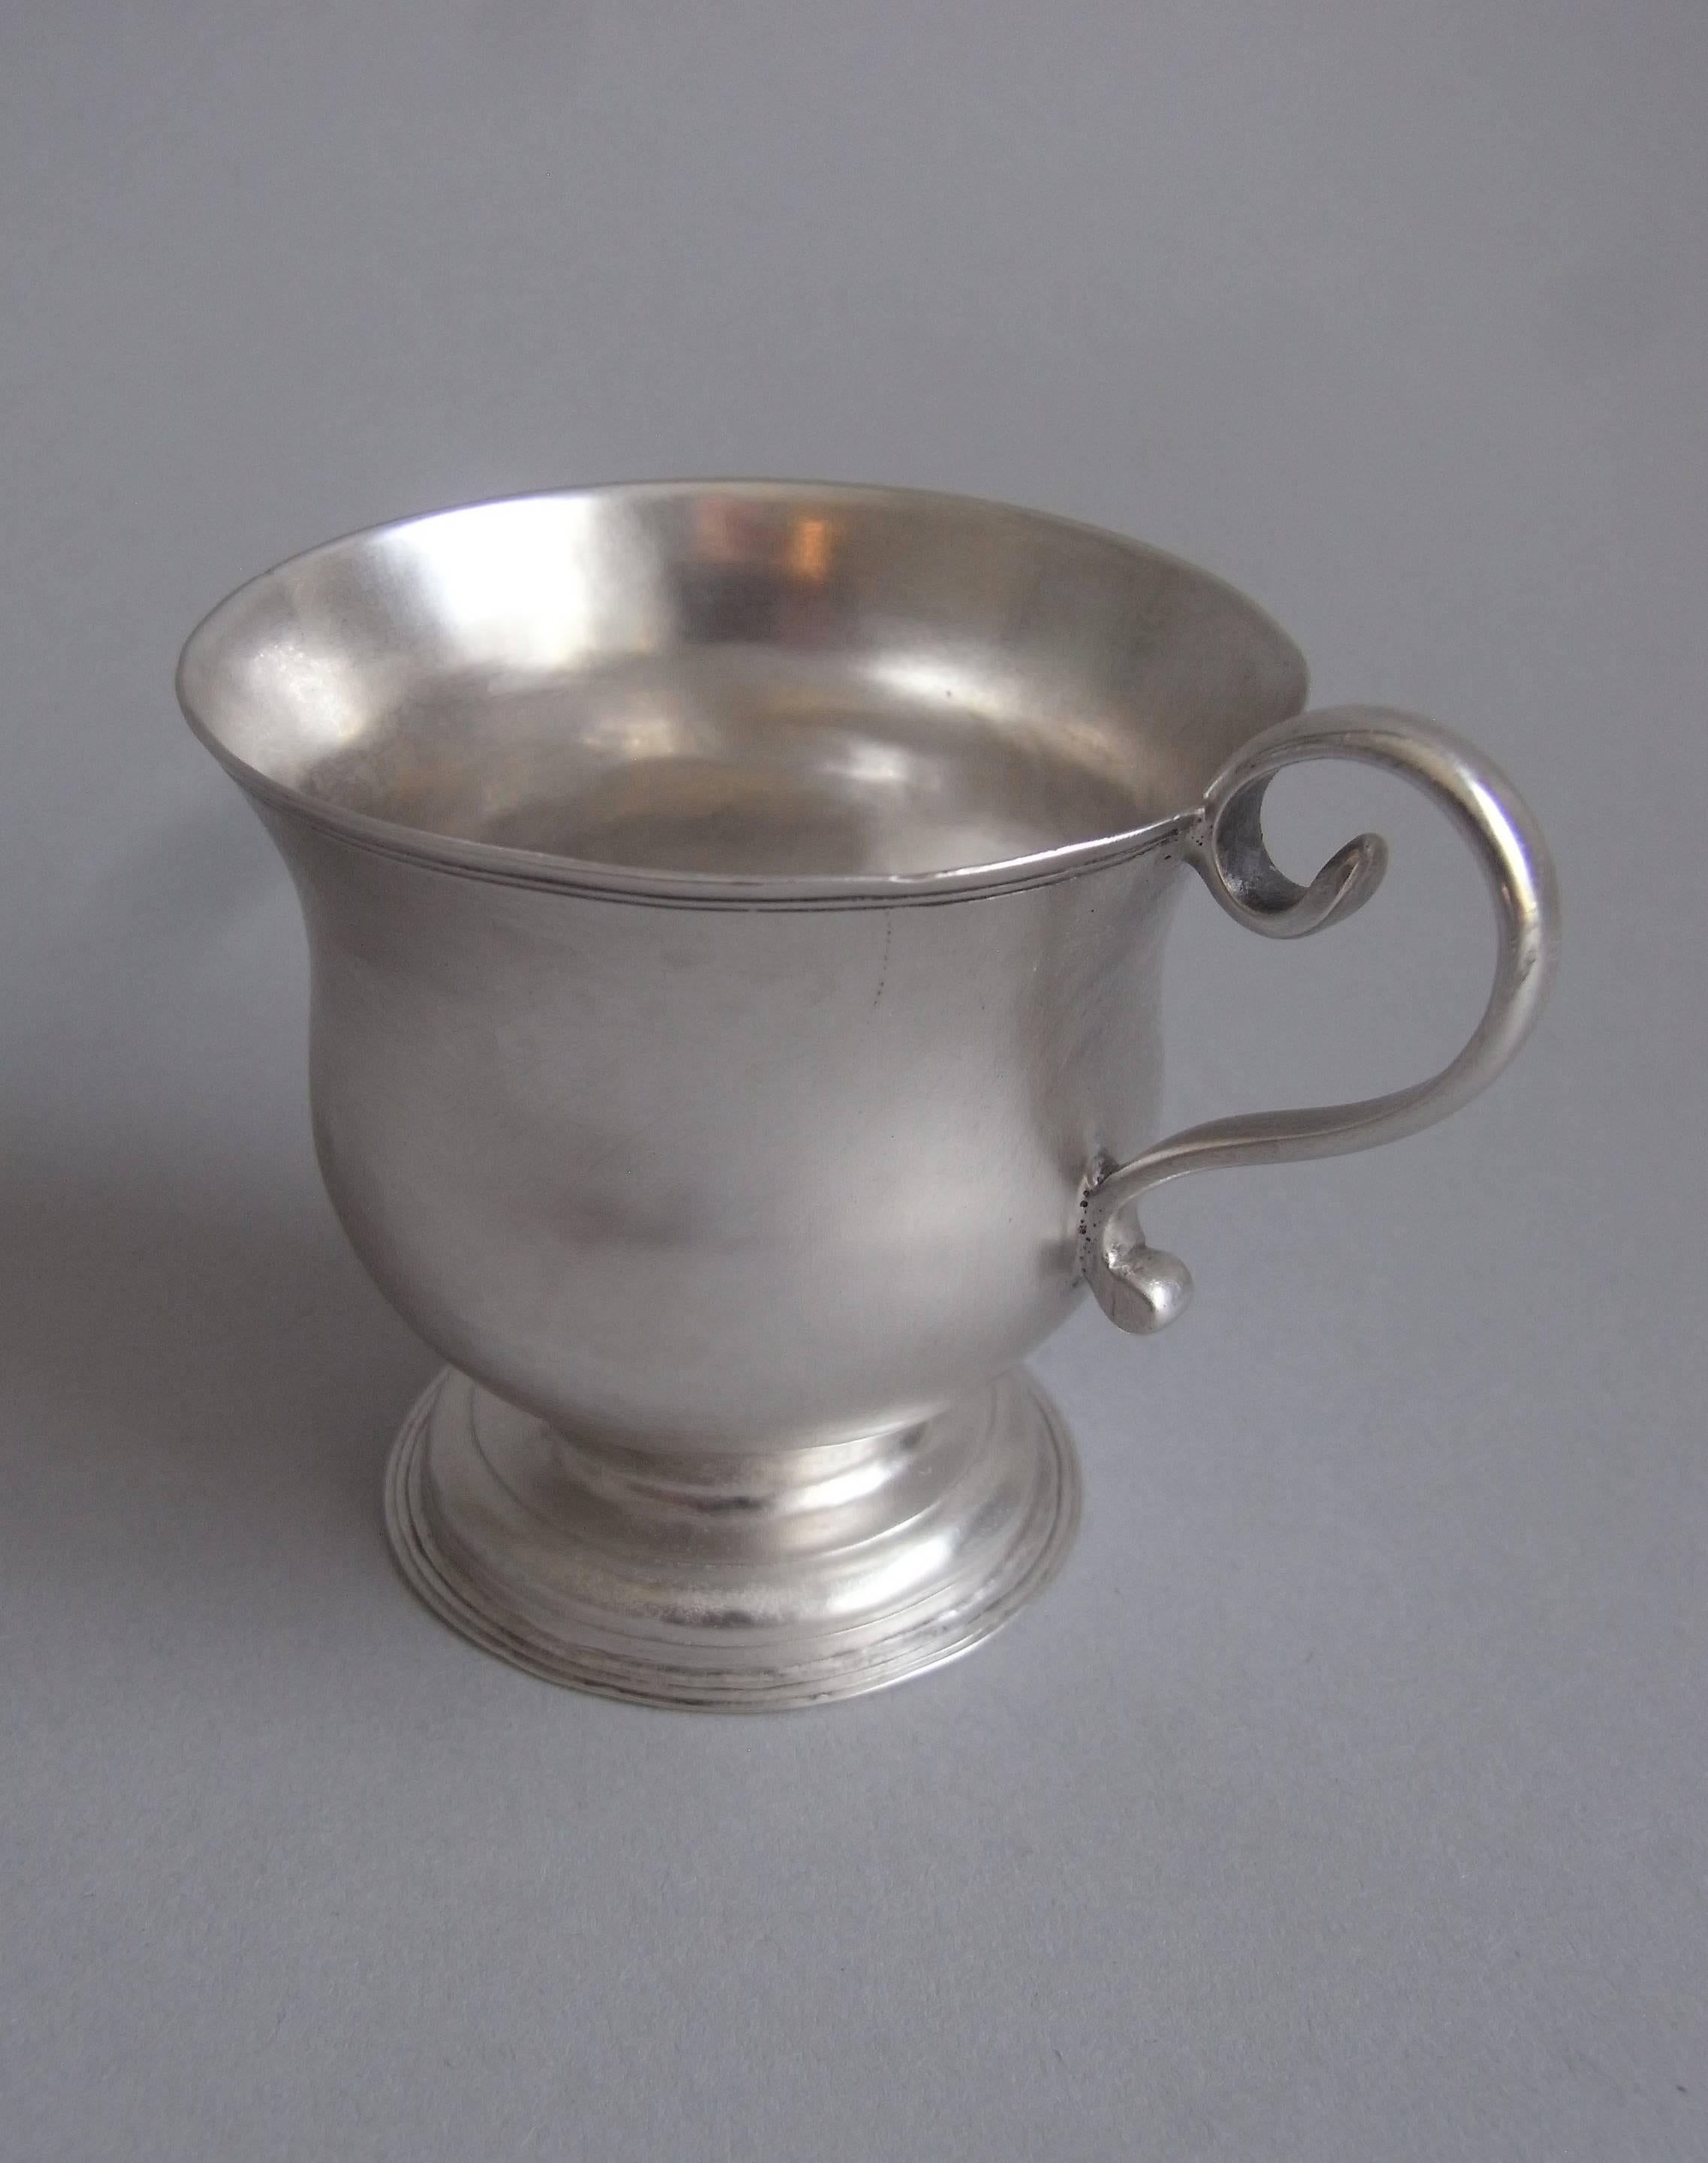 The cup stands on a stepped circular foot decorated with reeding. The bell shaped main body has an everted rim and is plain in design. This example has an attractive scroll handle and is engraved in the foot with a set of contemporary scratch